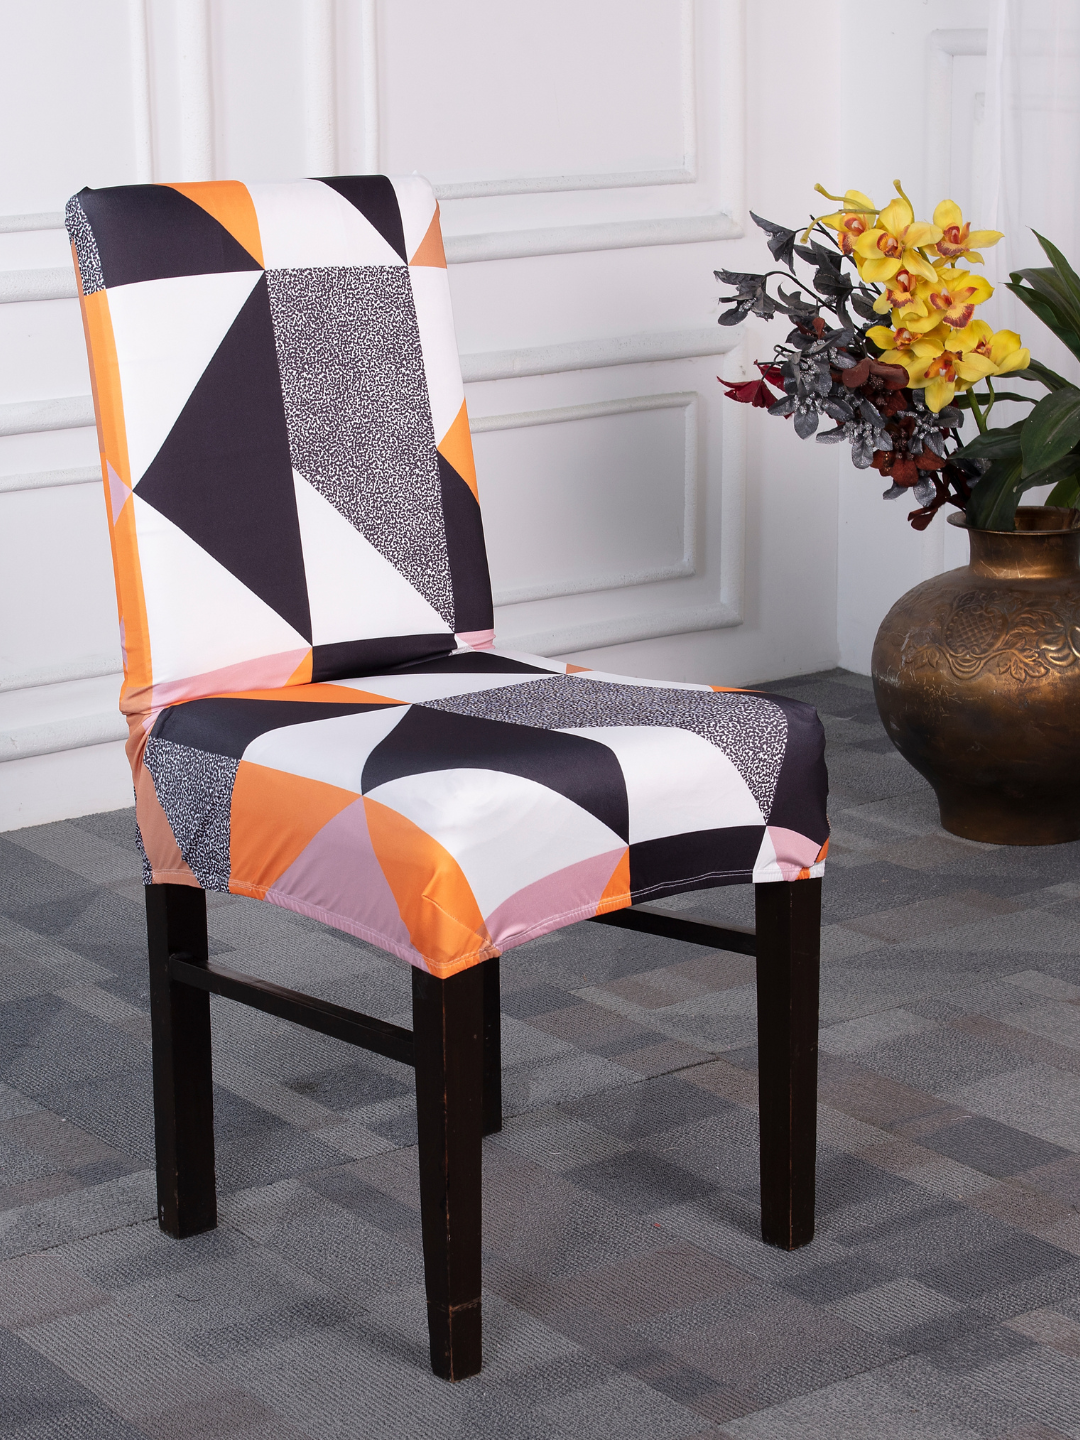 chair covers for dining room chairs, Chair covers for dining room chairs are a great way to protect your chairs from stains and spills while also adding a touch of style and sophistication to your dining room, super stretchable chairs covers, hand washable, machine washable, magic universal chair cover-prism orange.